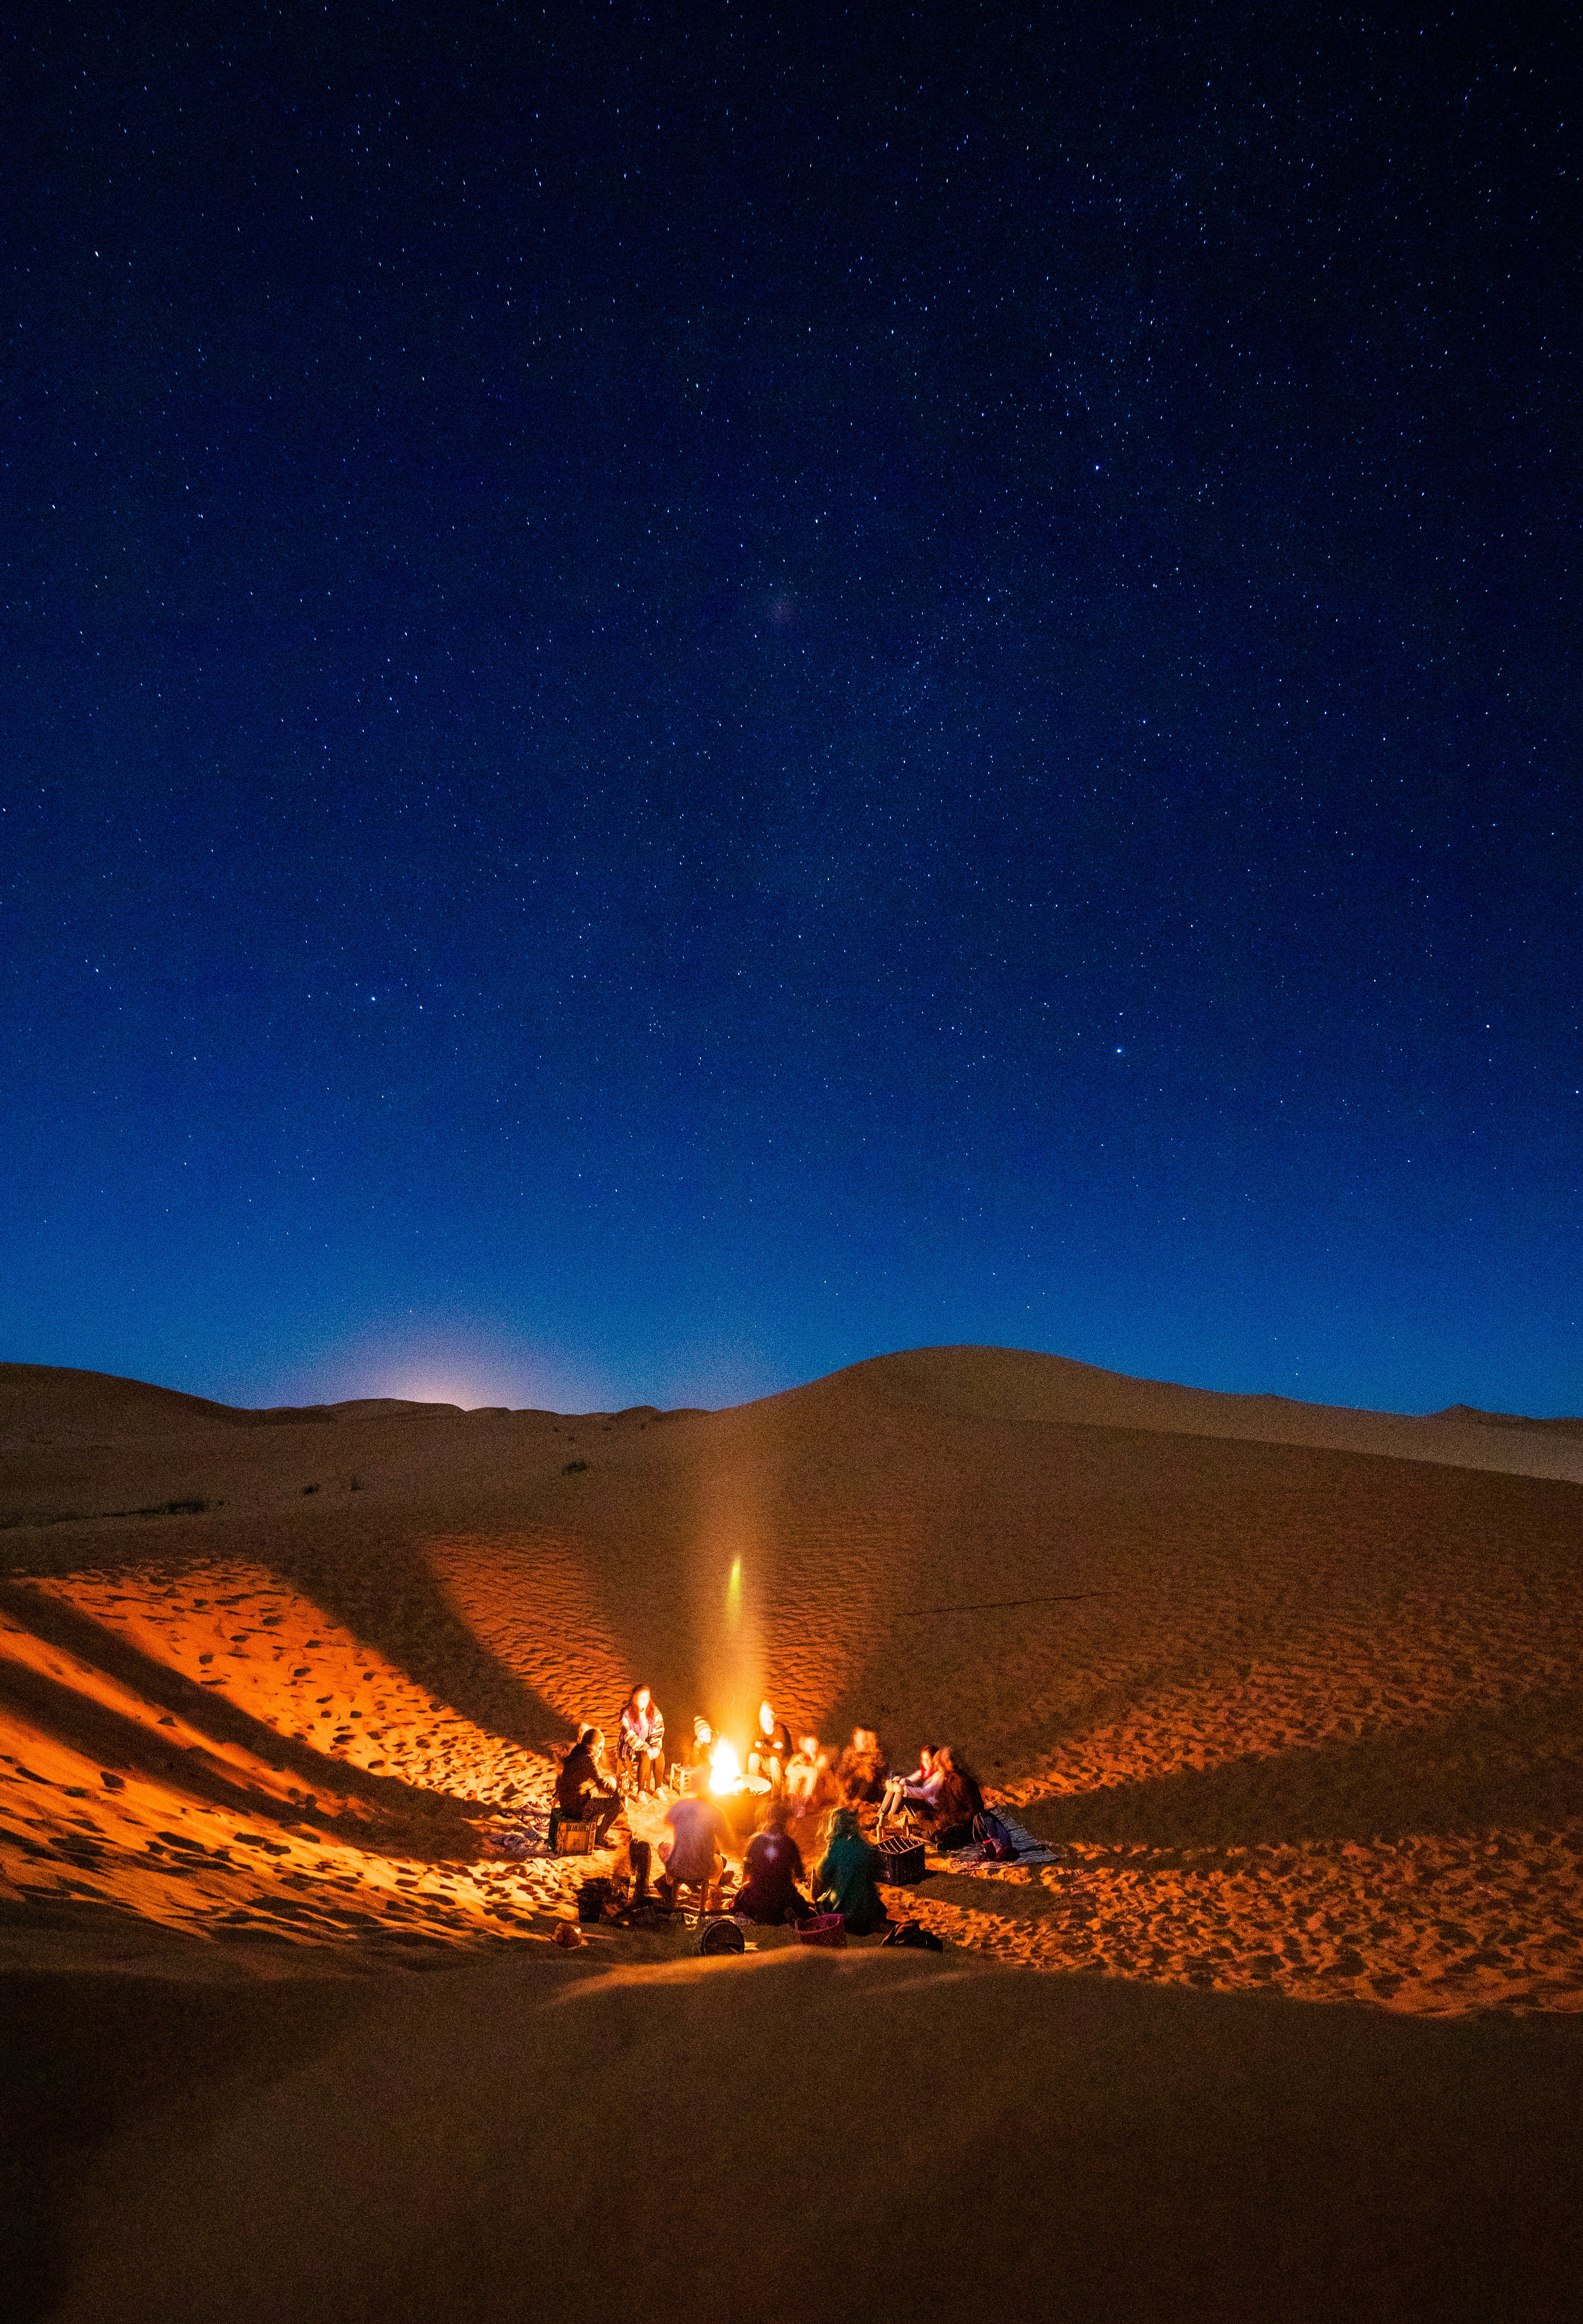 People Sitting in Front of Bonfire in Desert during Nighttime · Free